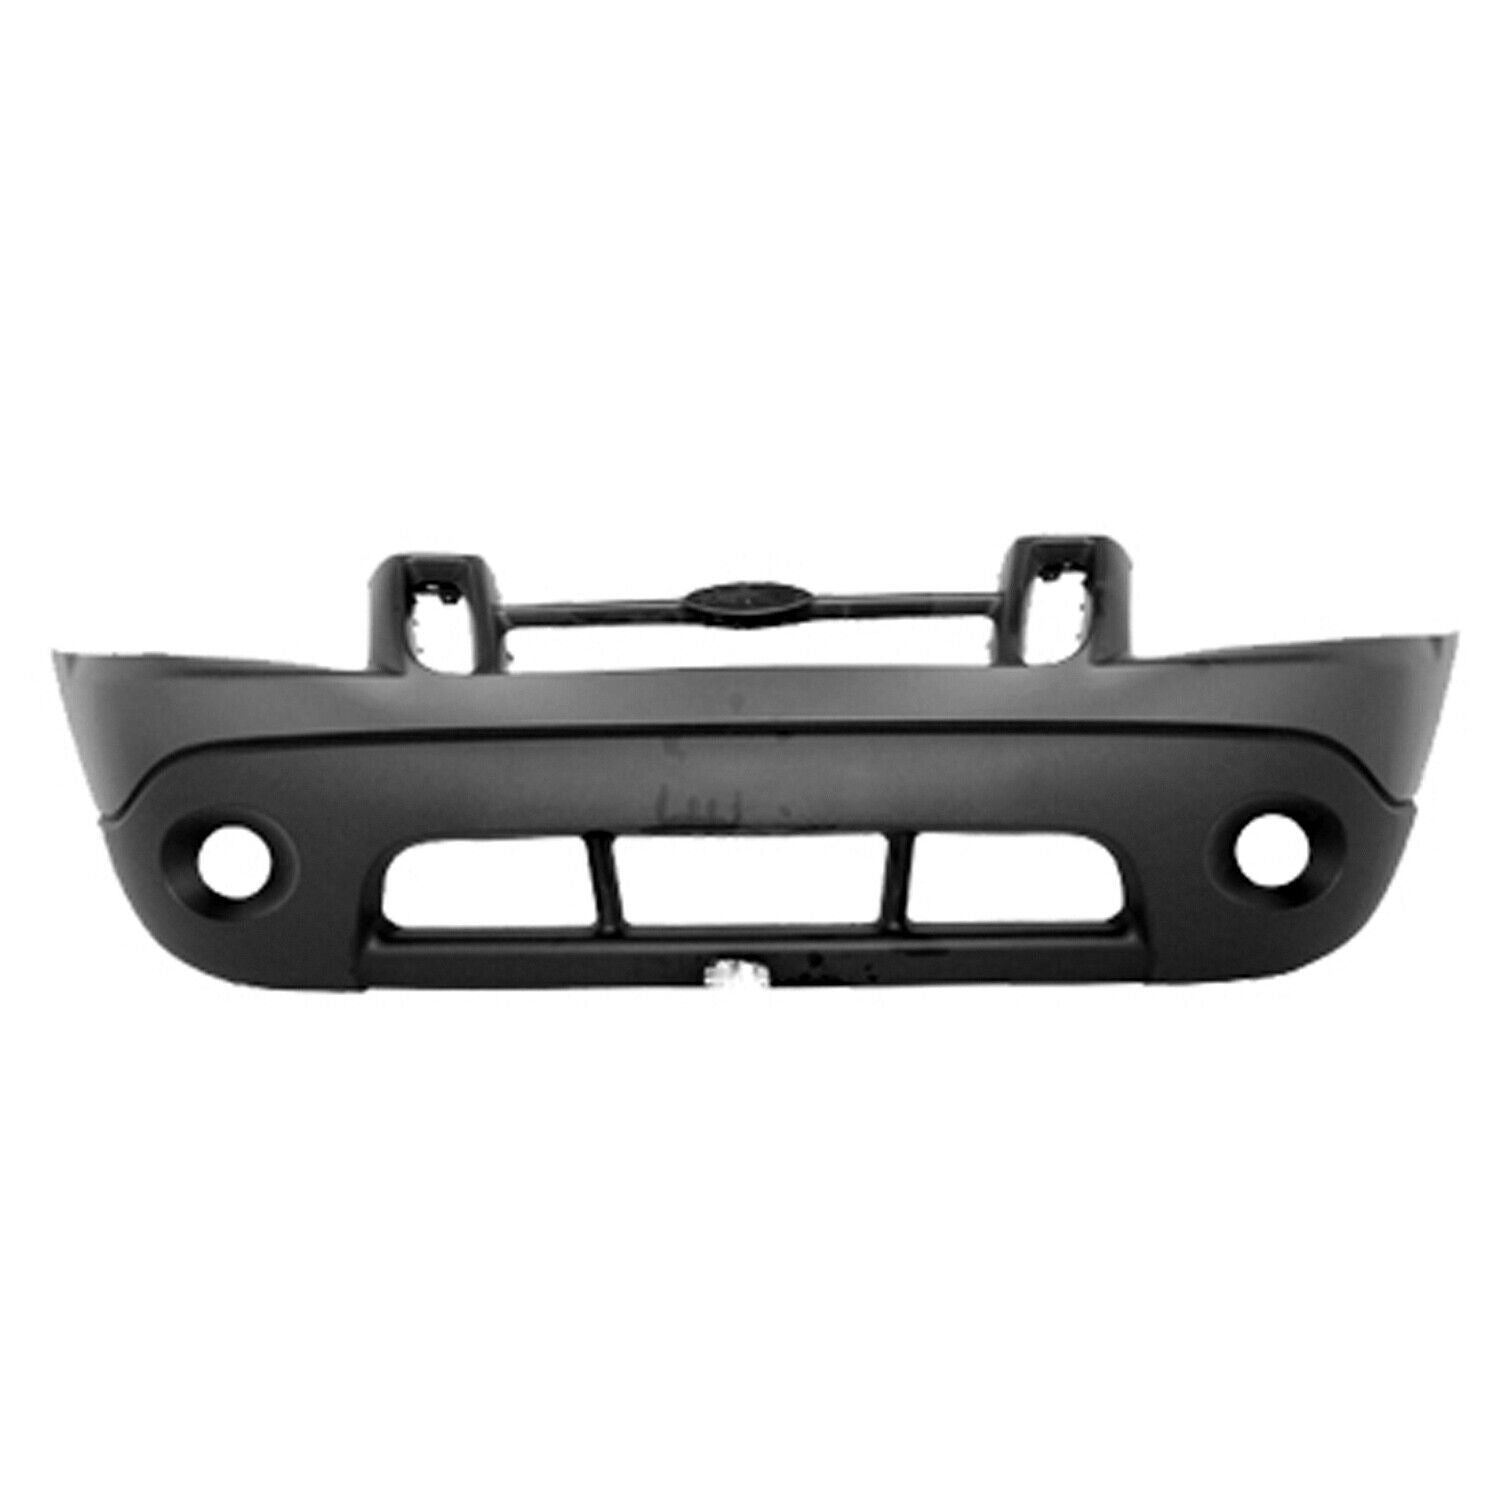 2004-2005 FORD EXPLORER; Front Bumper Cover; XLS/XLT w/FL hole Painted to Match